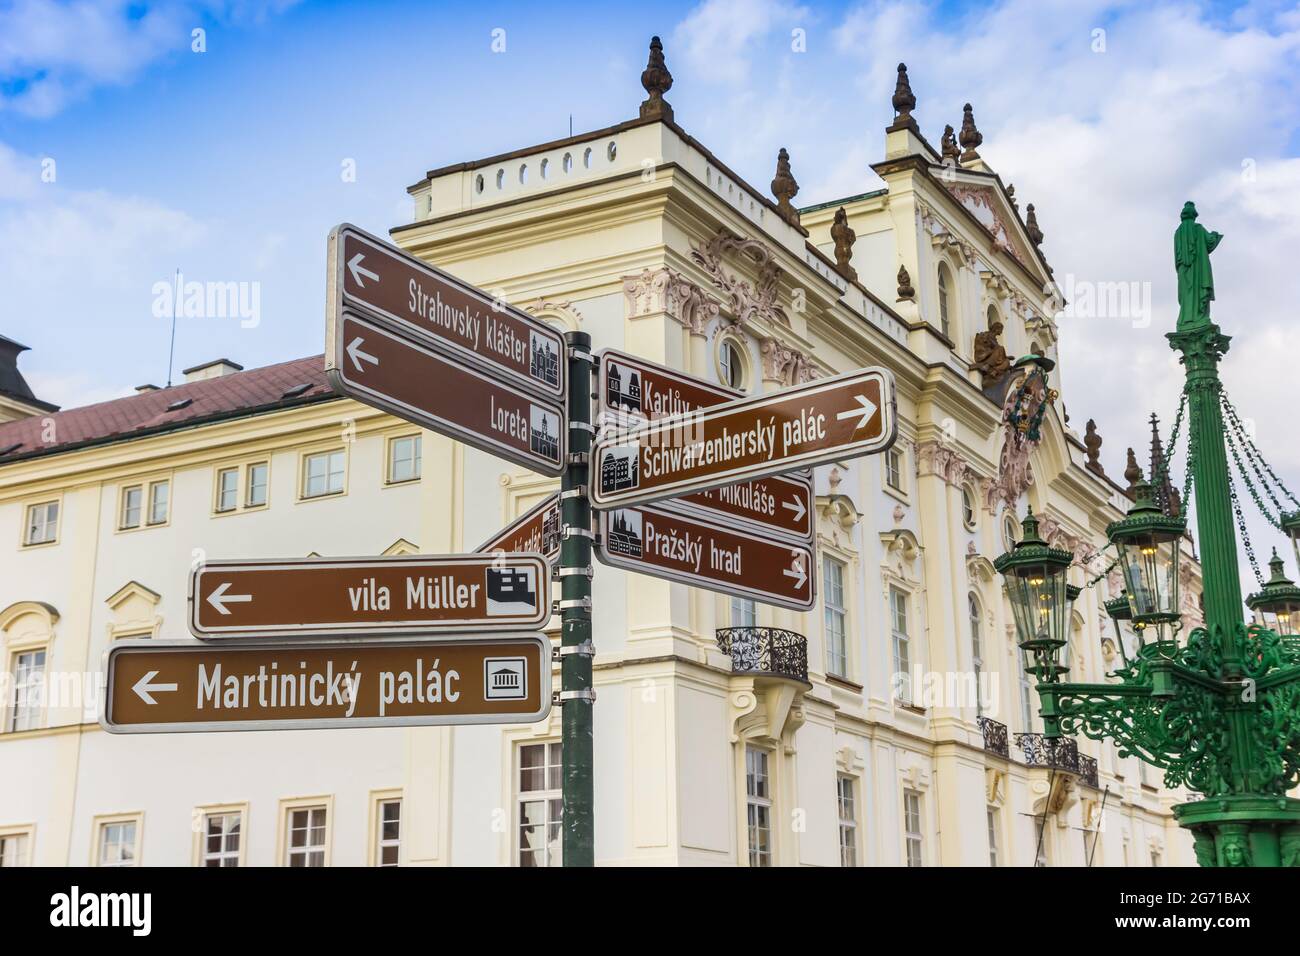 Tourist sign in front of the Archbishop Palace in Prague, Czech Republic Stock Photo